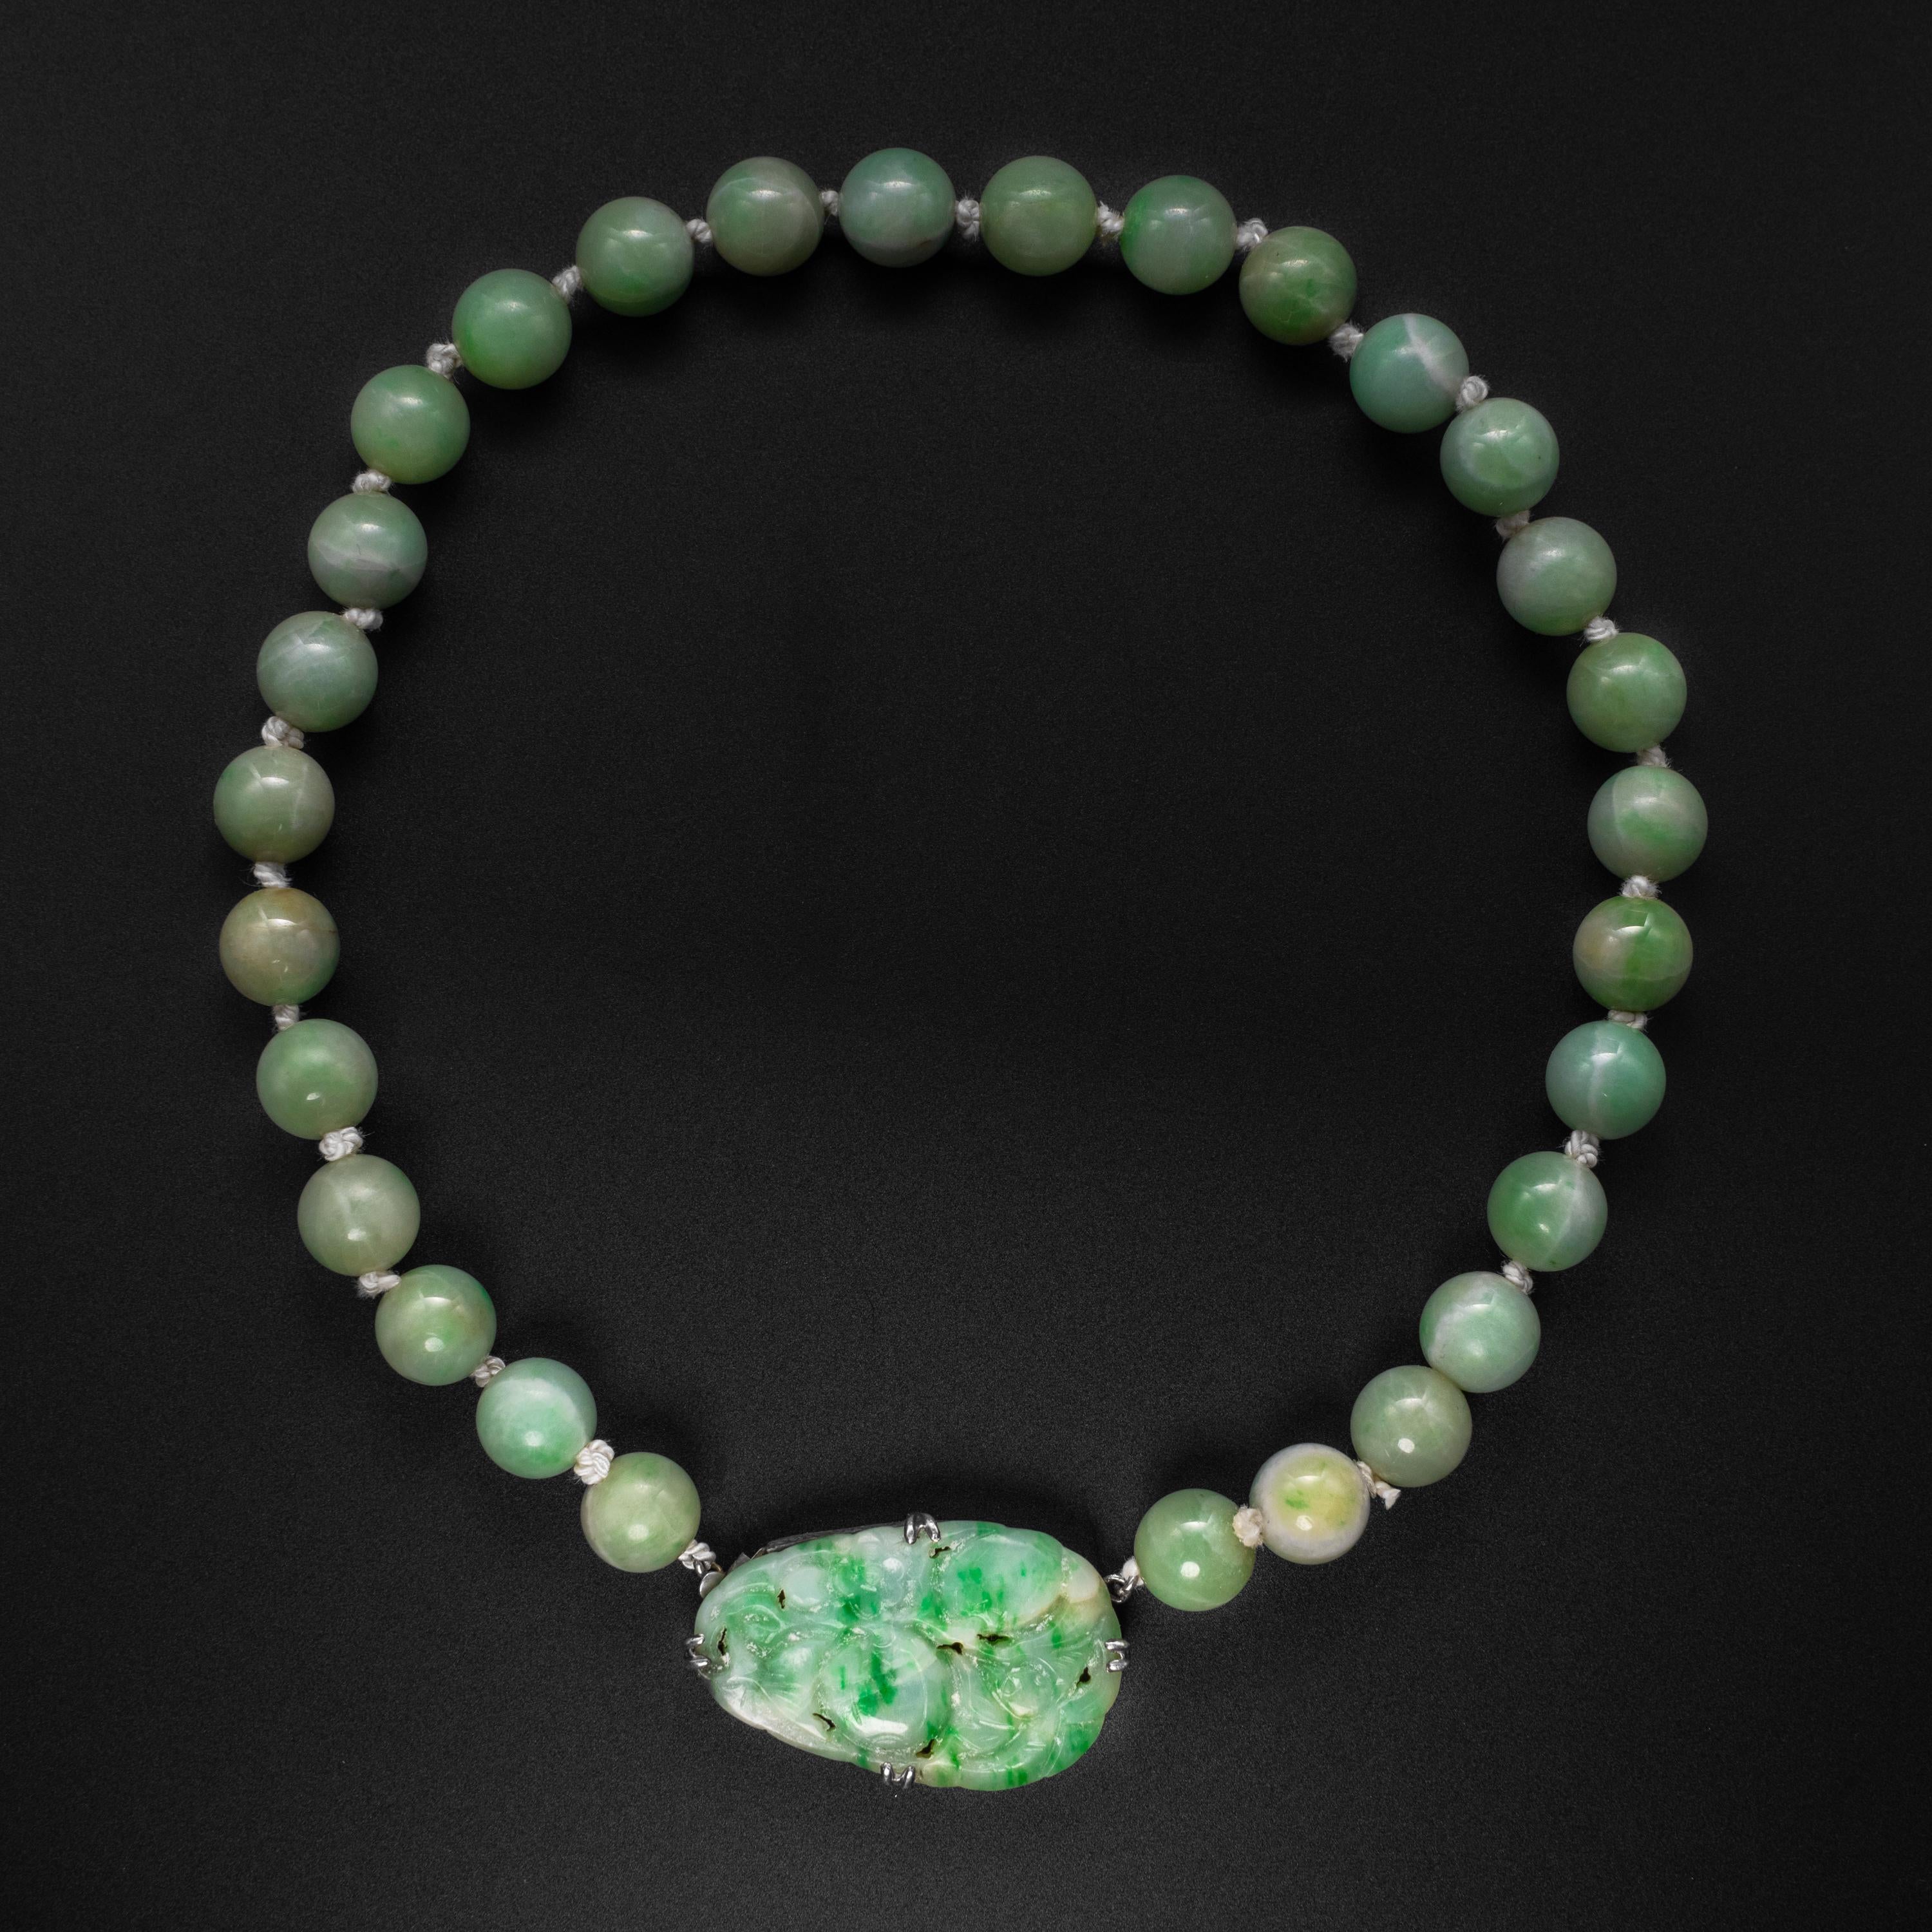 This Art Deco jadeite jade necklace features 29 11mm tender, young green Burmese jadeite beads, each of which was hand-carved and polished without the use of electricity or modern polishing aids. Jade beads of this size are uncommon. They have the